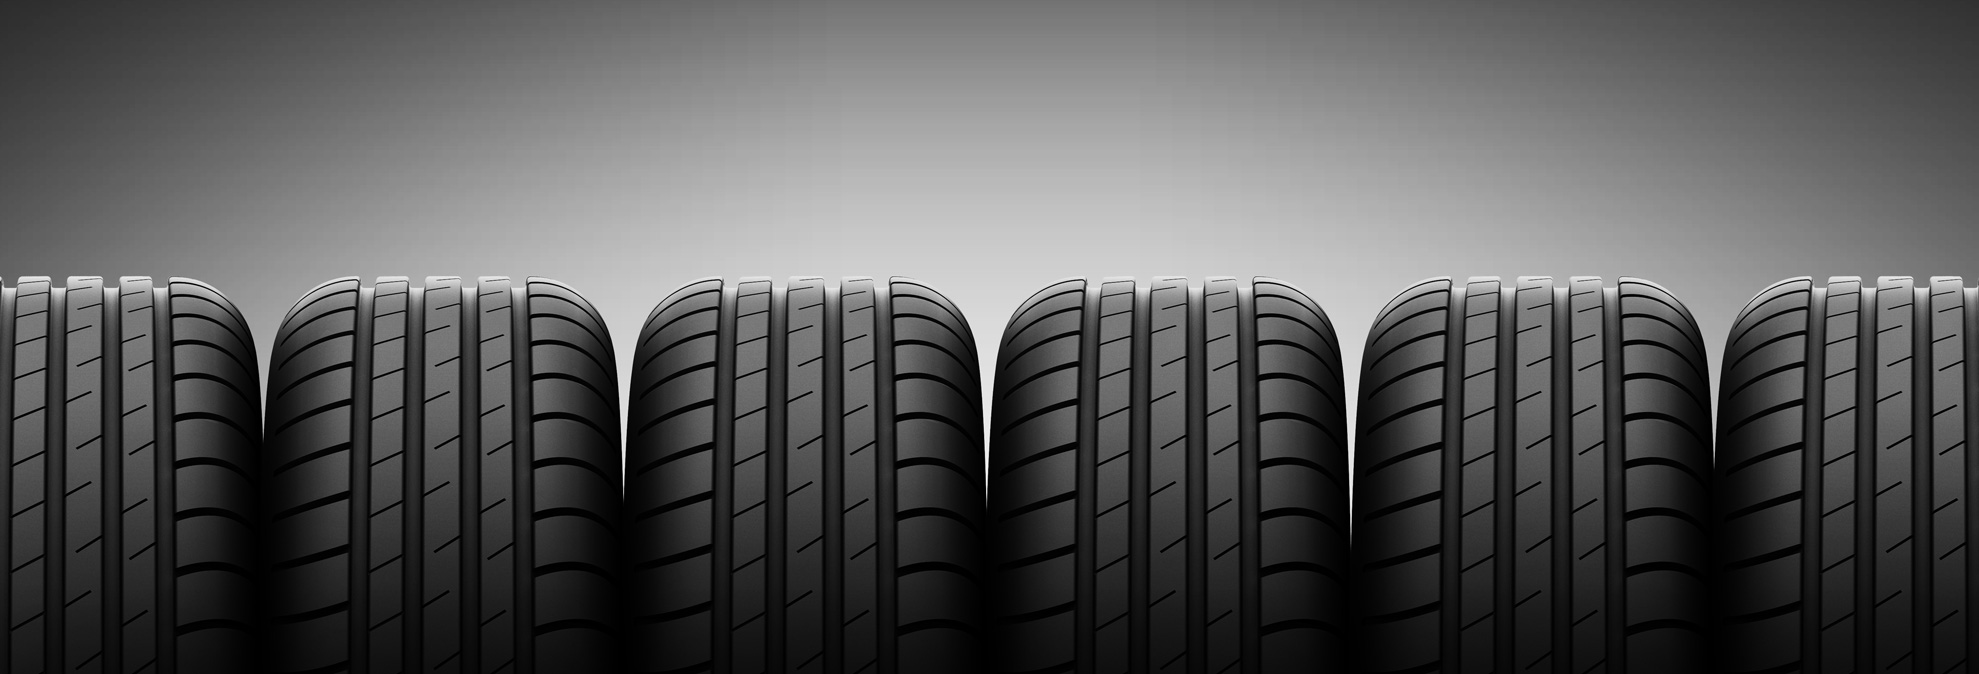 Where to Find Popular Tire Brands - Consumer Reports